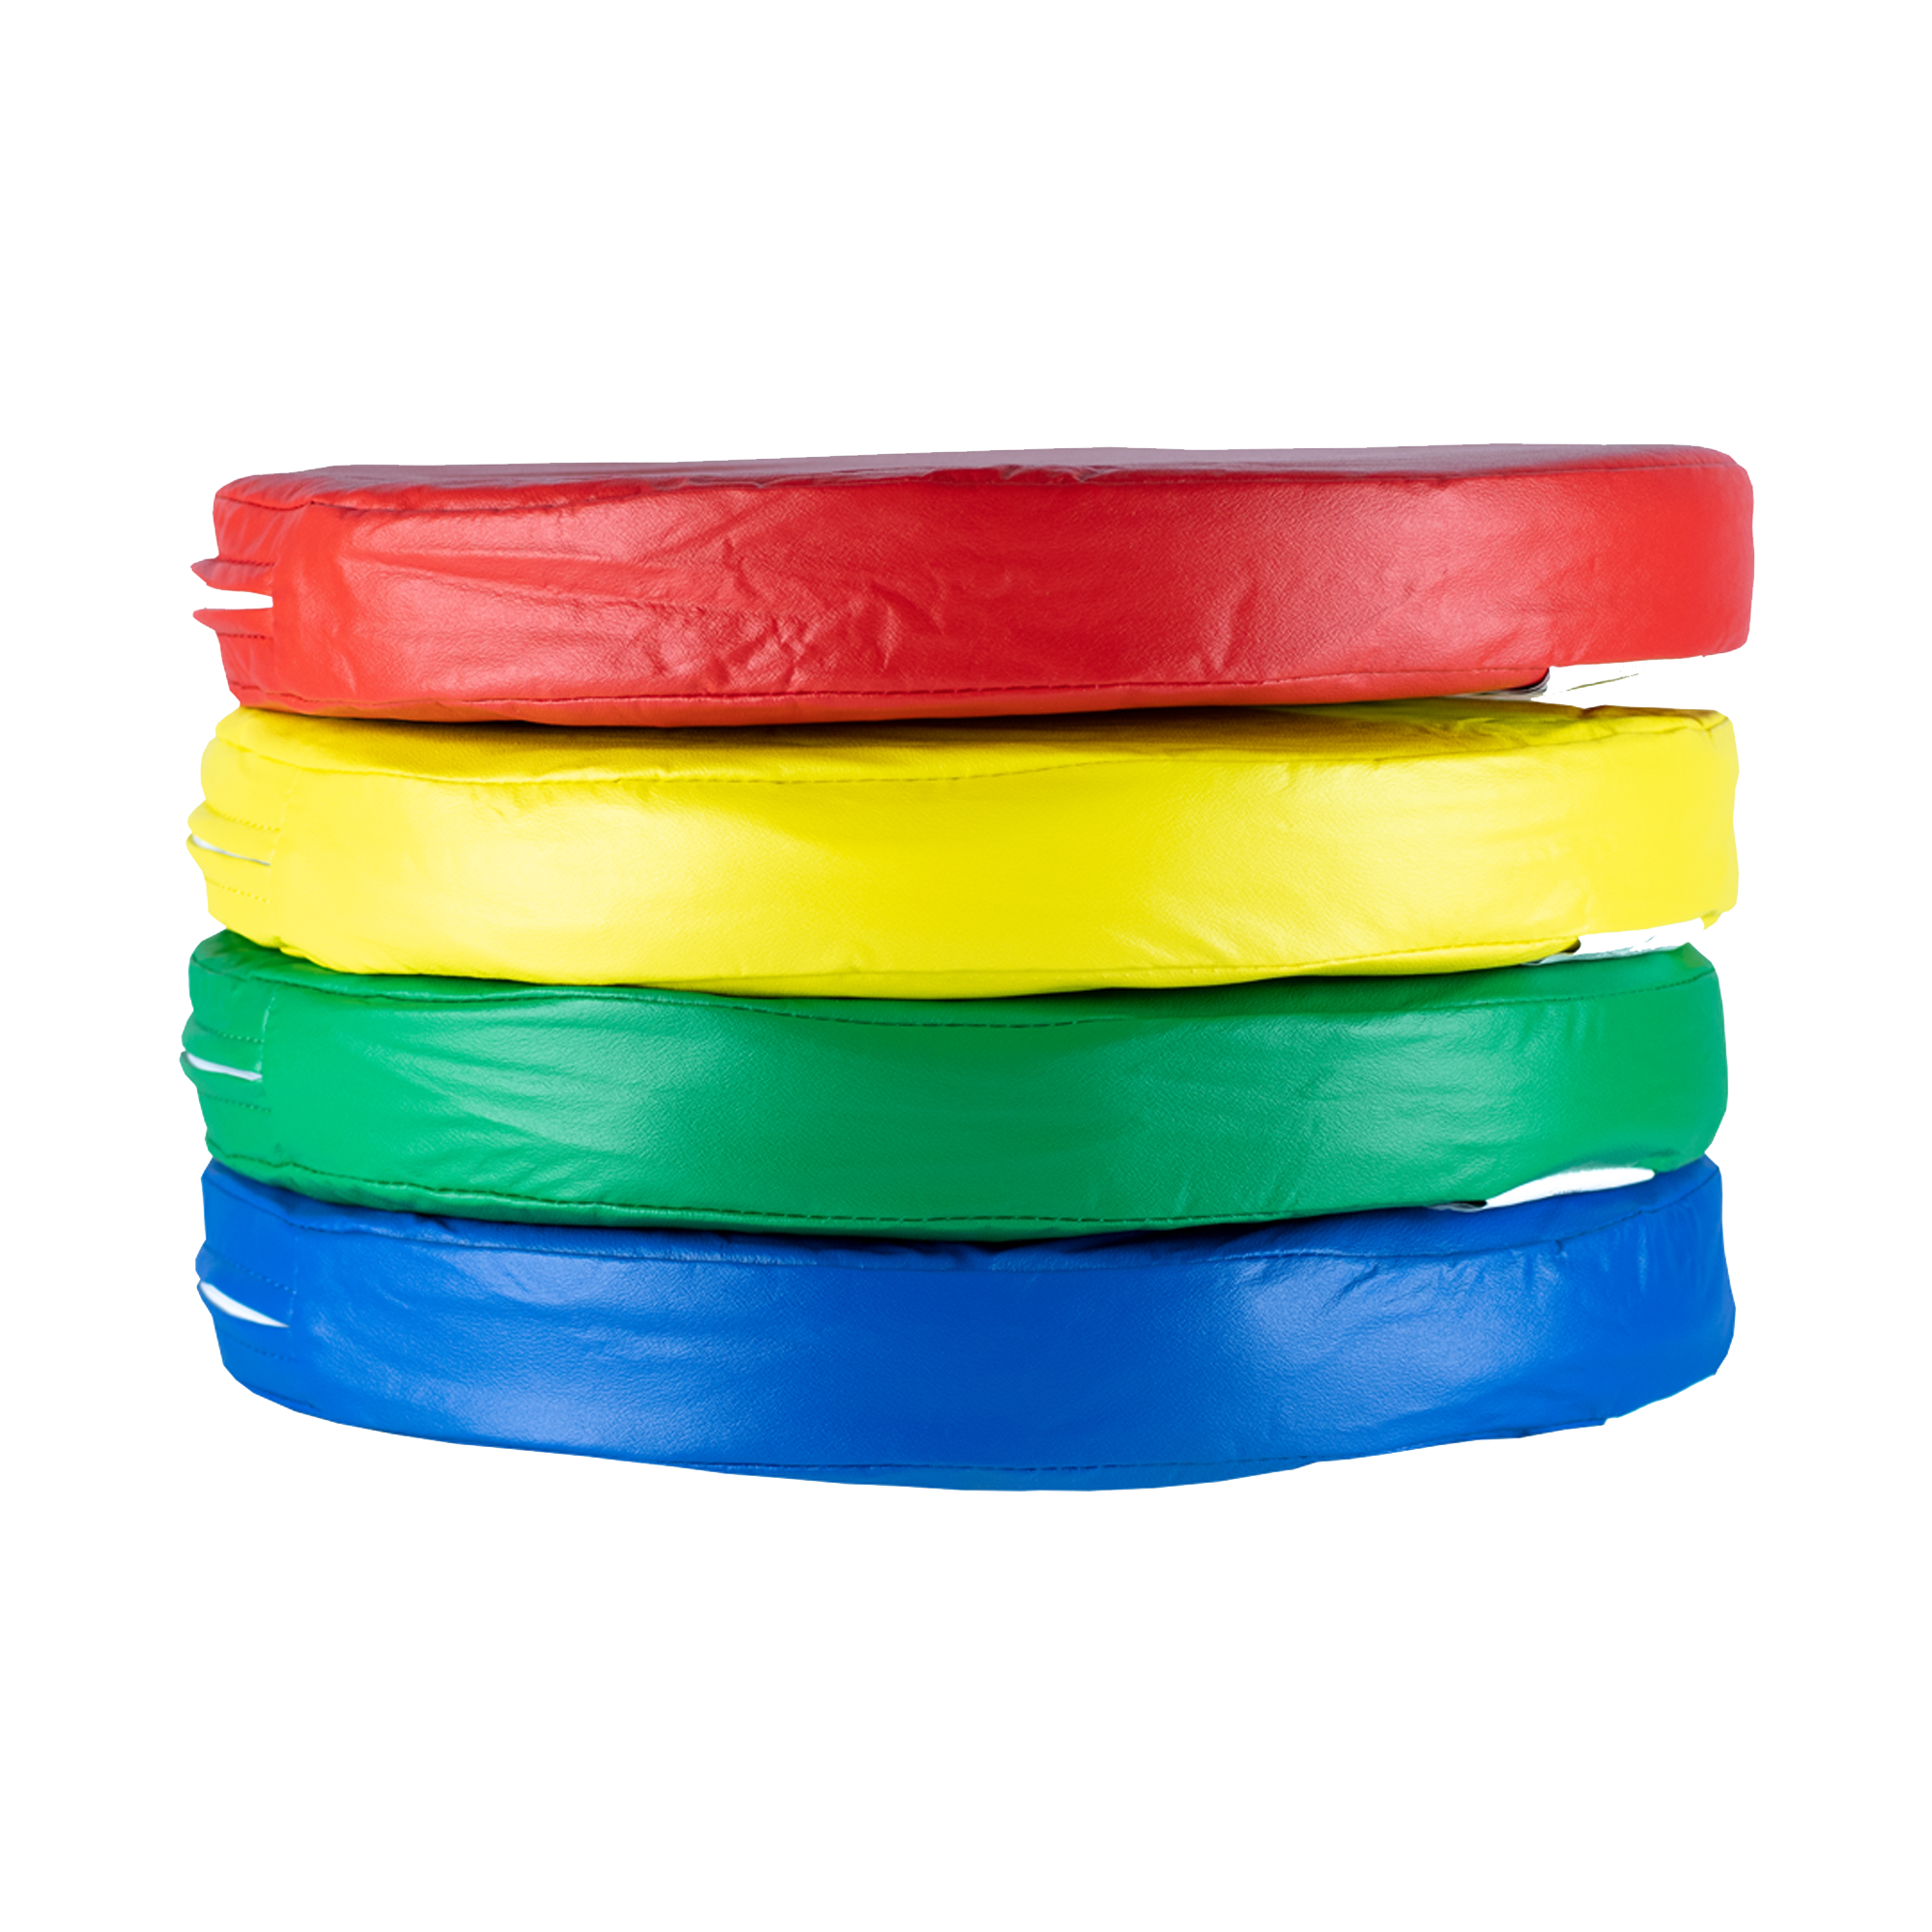 4 PACK OF ROUND KINDERCUSHIONS